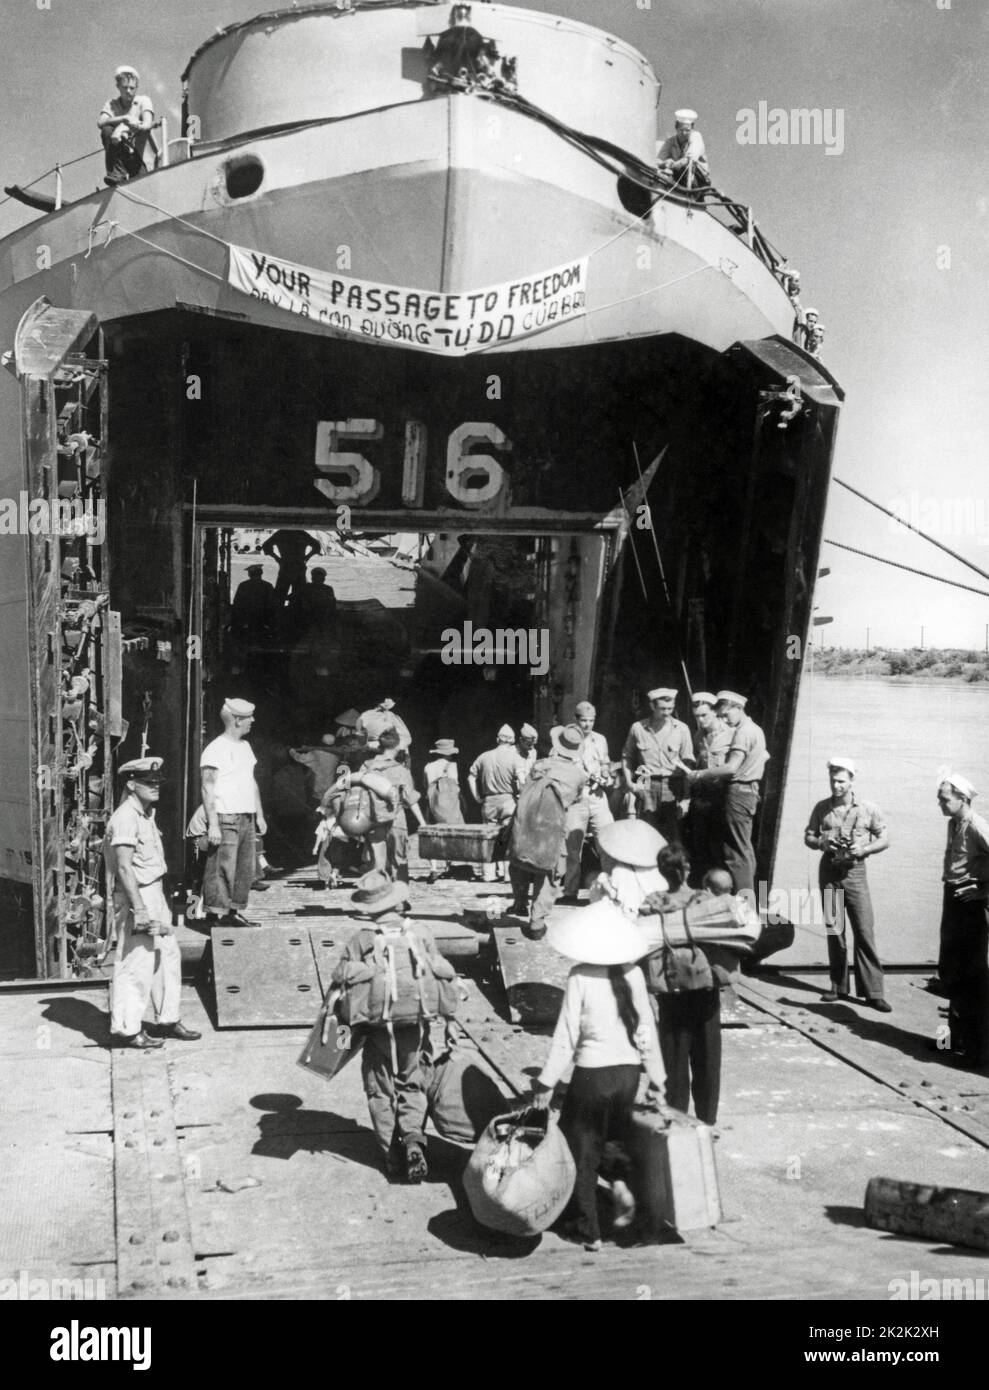 At the end of the Indochina War, hundreds of Vietnamese refugees embarking a United States Navy boat to go to the Republic of Vietnam. This operation will be called 'Operation Passage to Freedom'. October 1954 Stock Photo